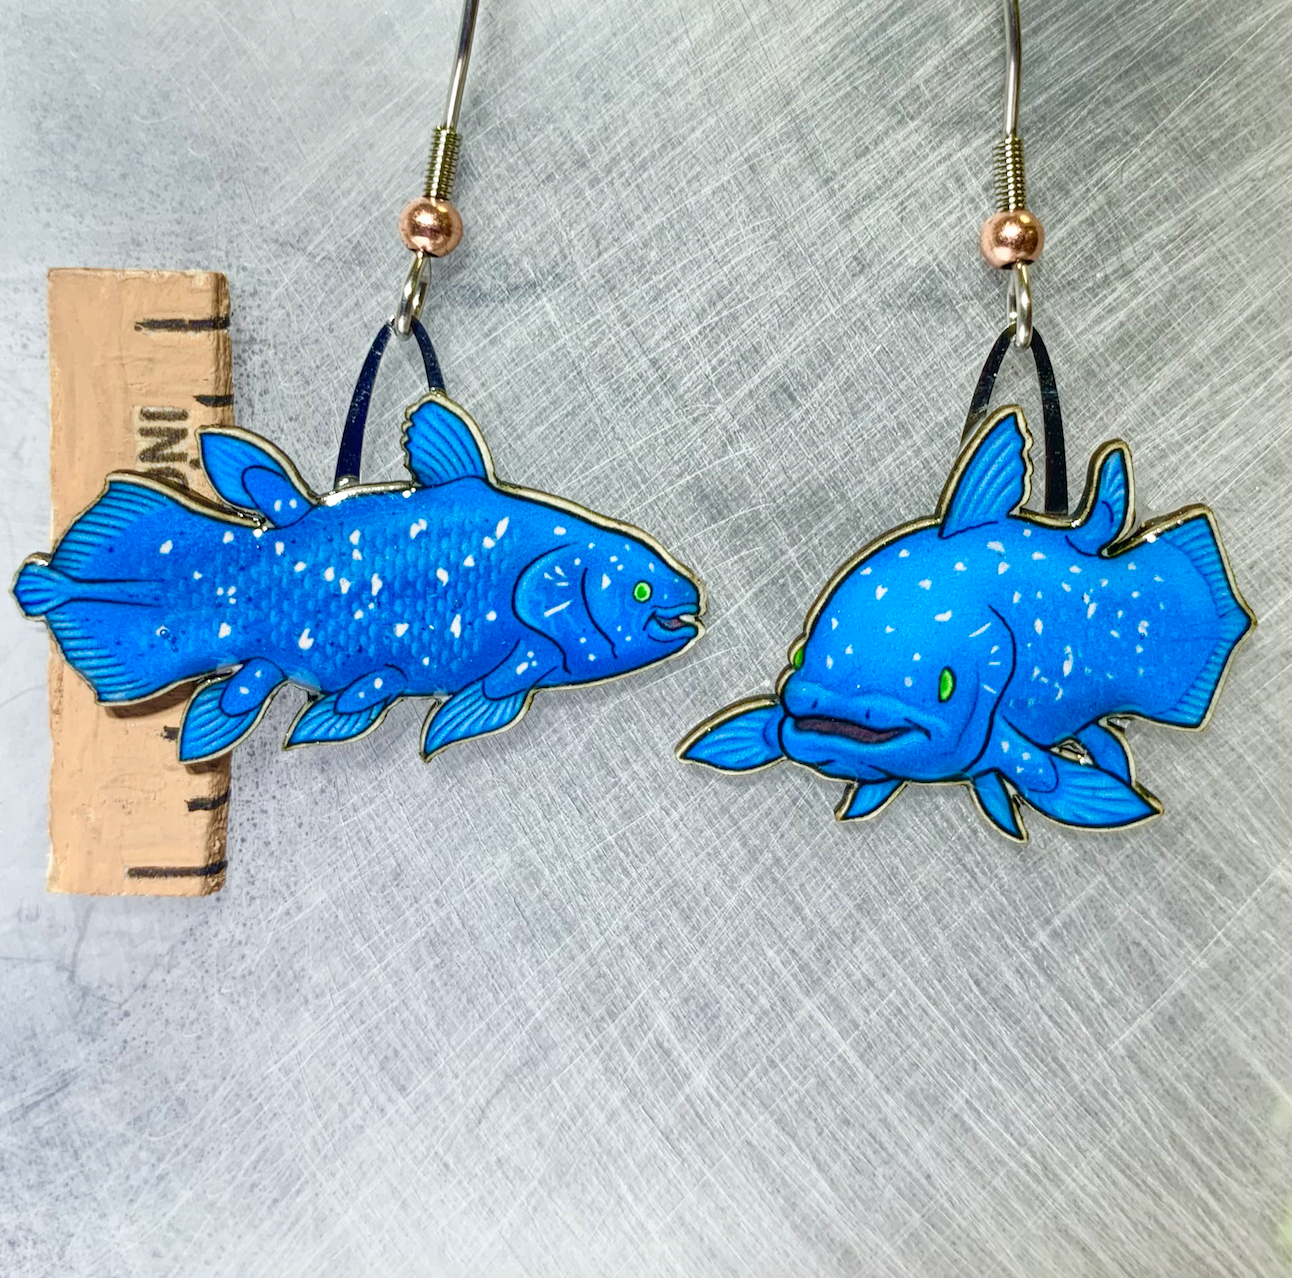 Picture shown is of 1 inch tall pair of earrings of the fish the Coelacanth.